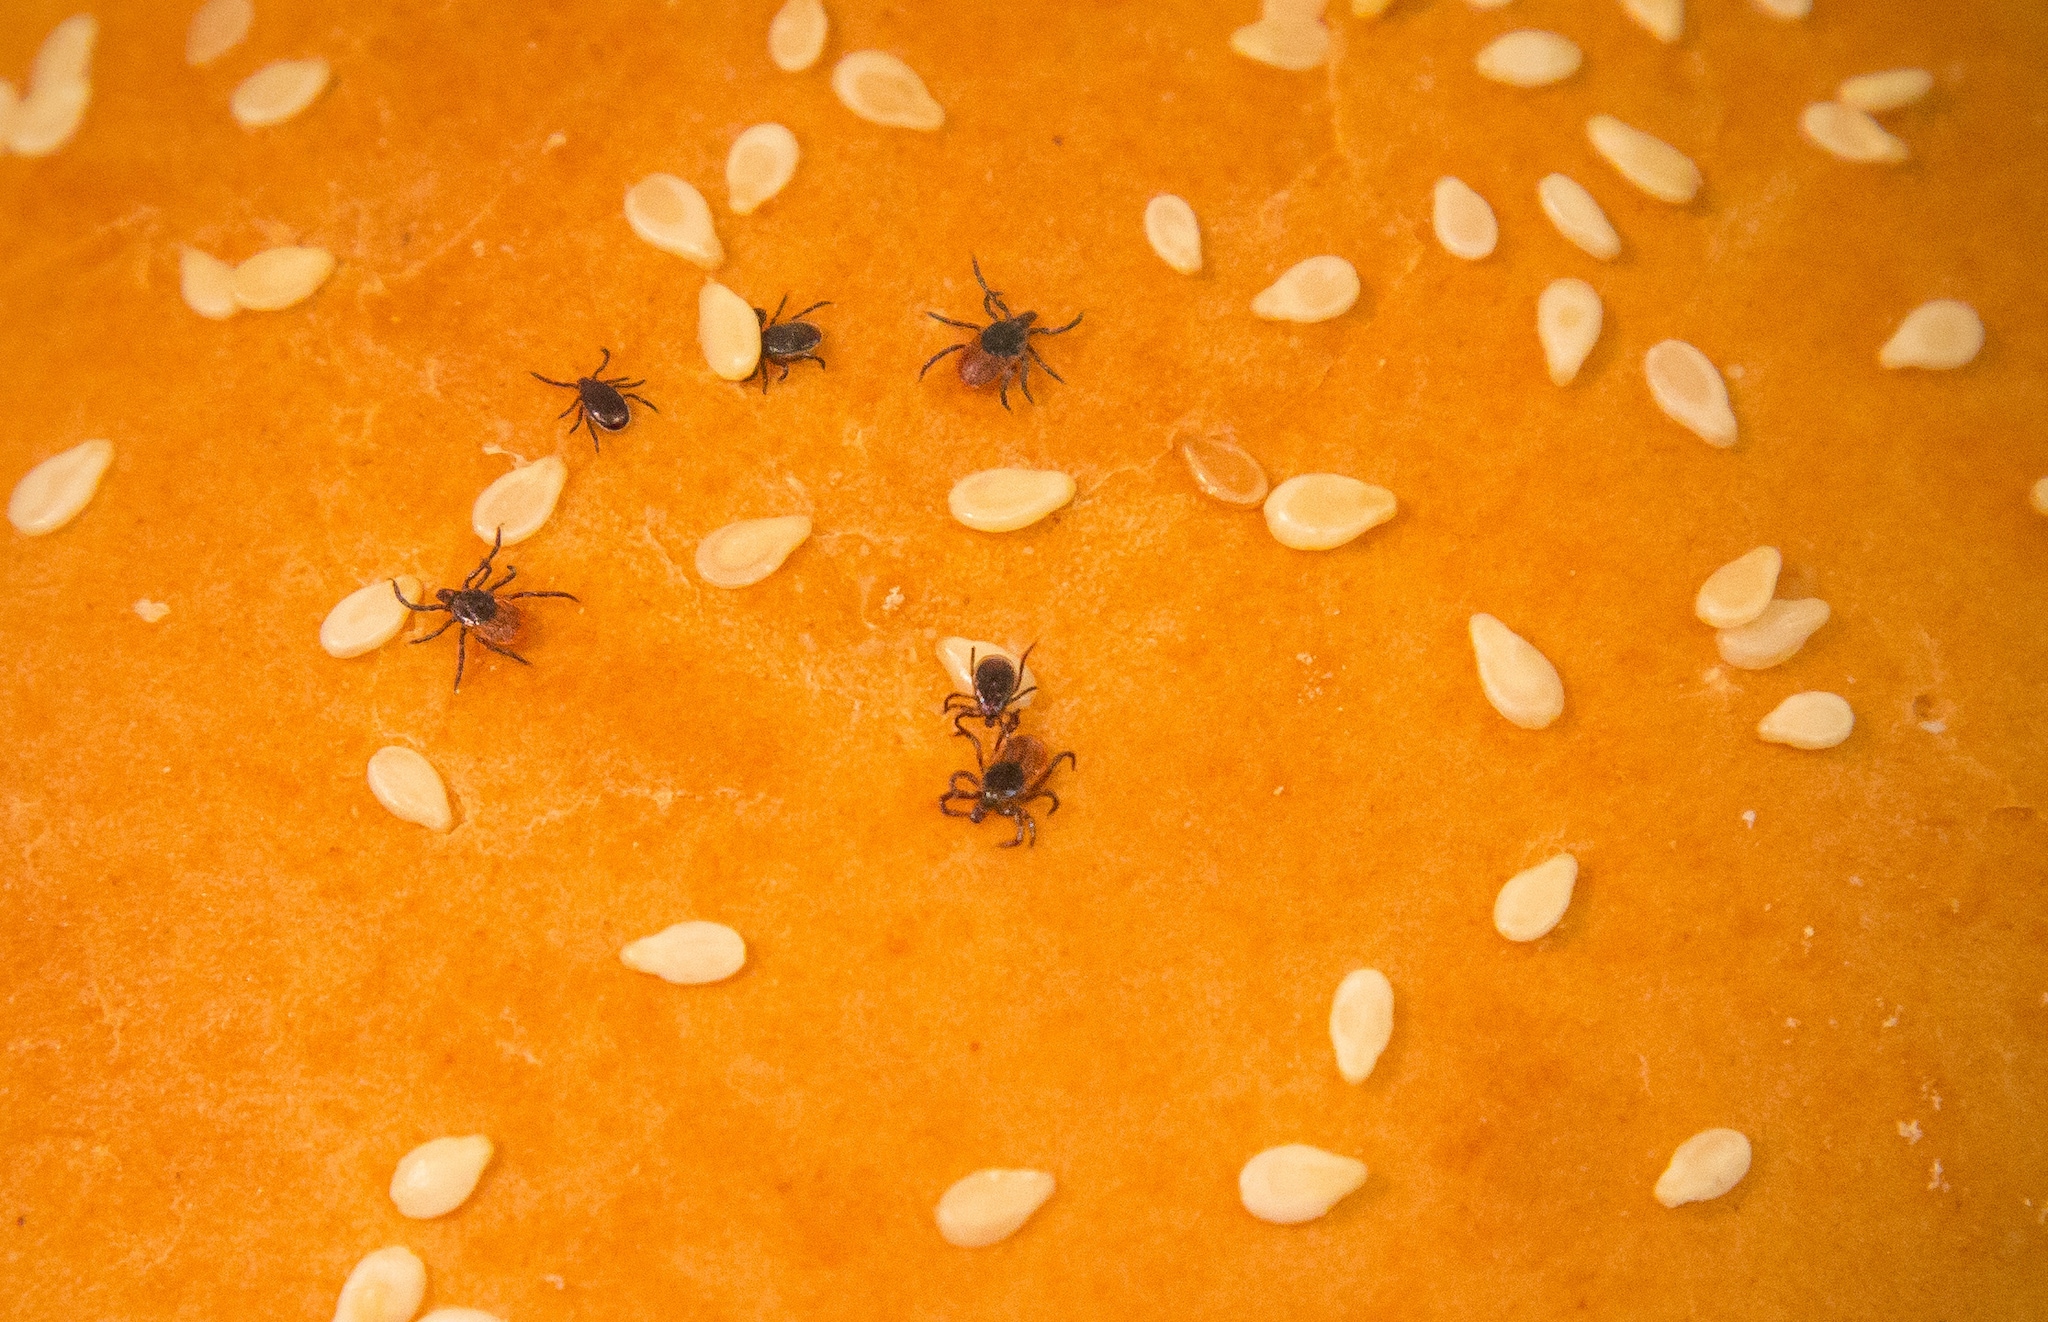 Photo of female adult blacklegged ticks on a sesame seed bun to demonstrate relative size.